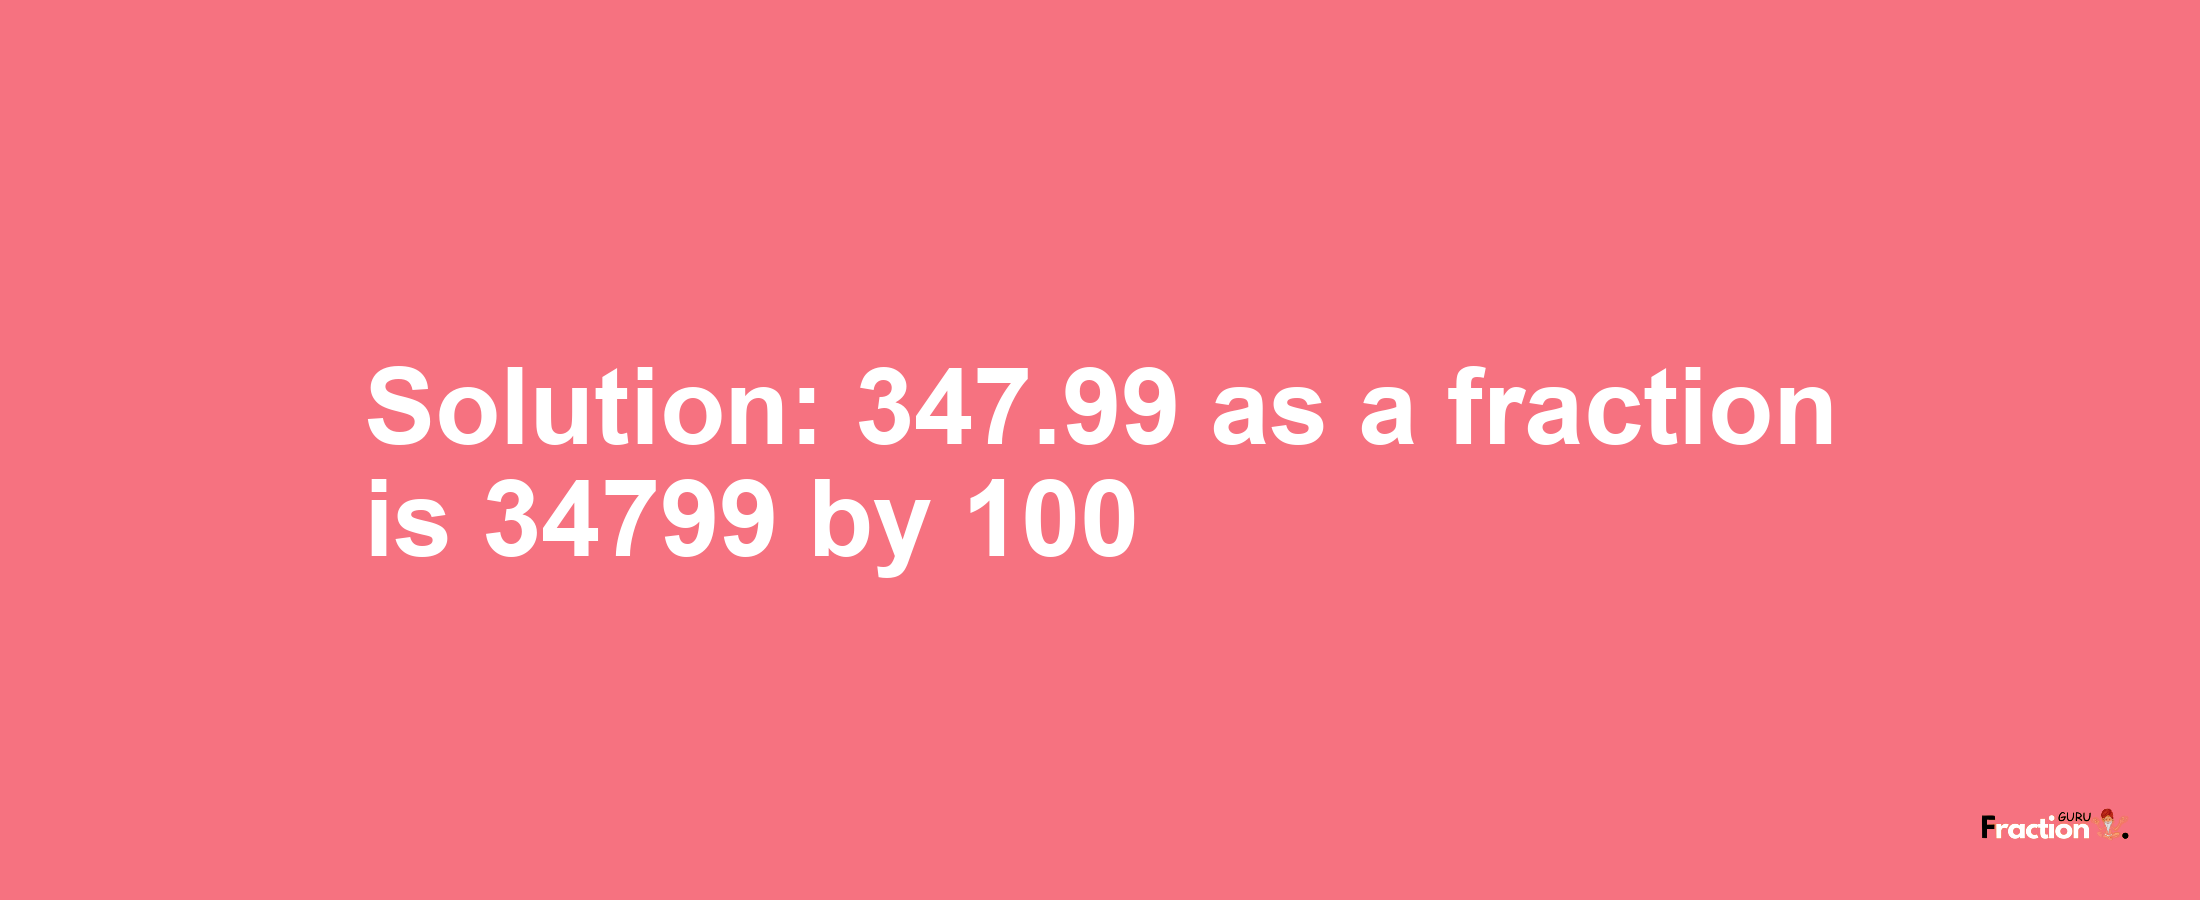 Solution:347.99 as a fraction is 34799/100